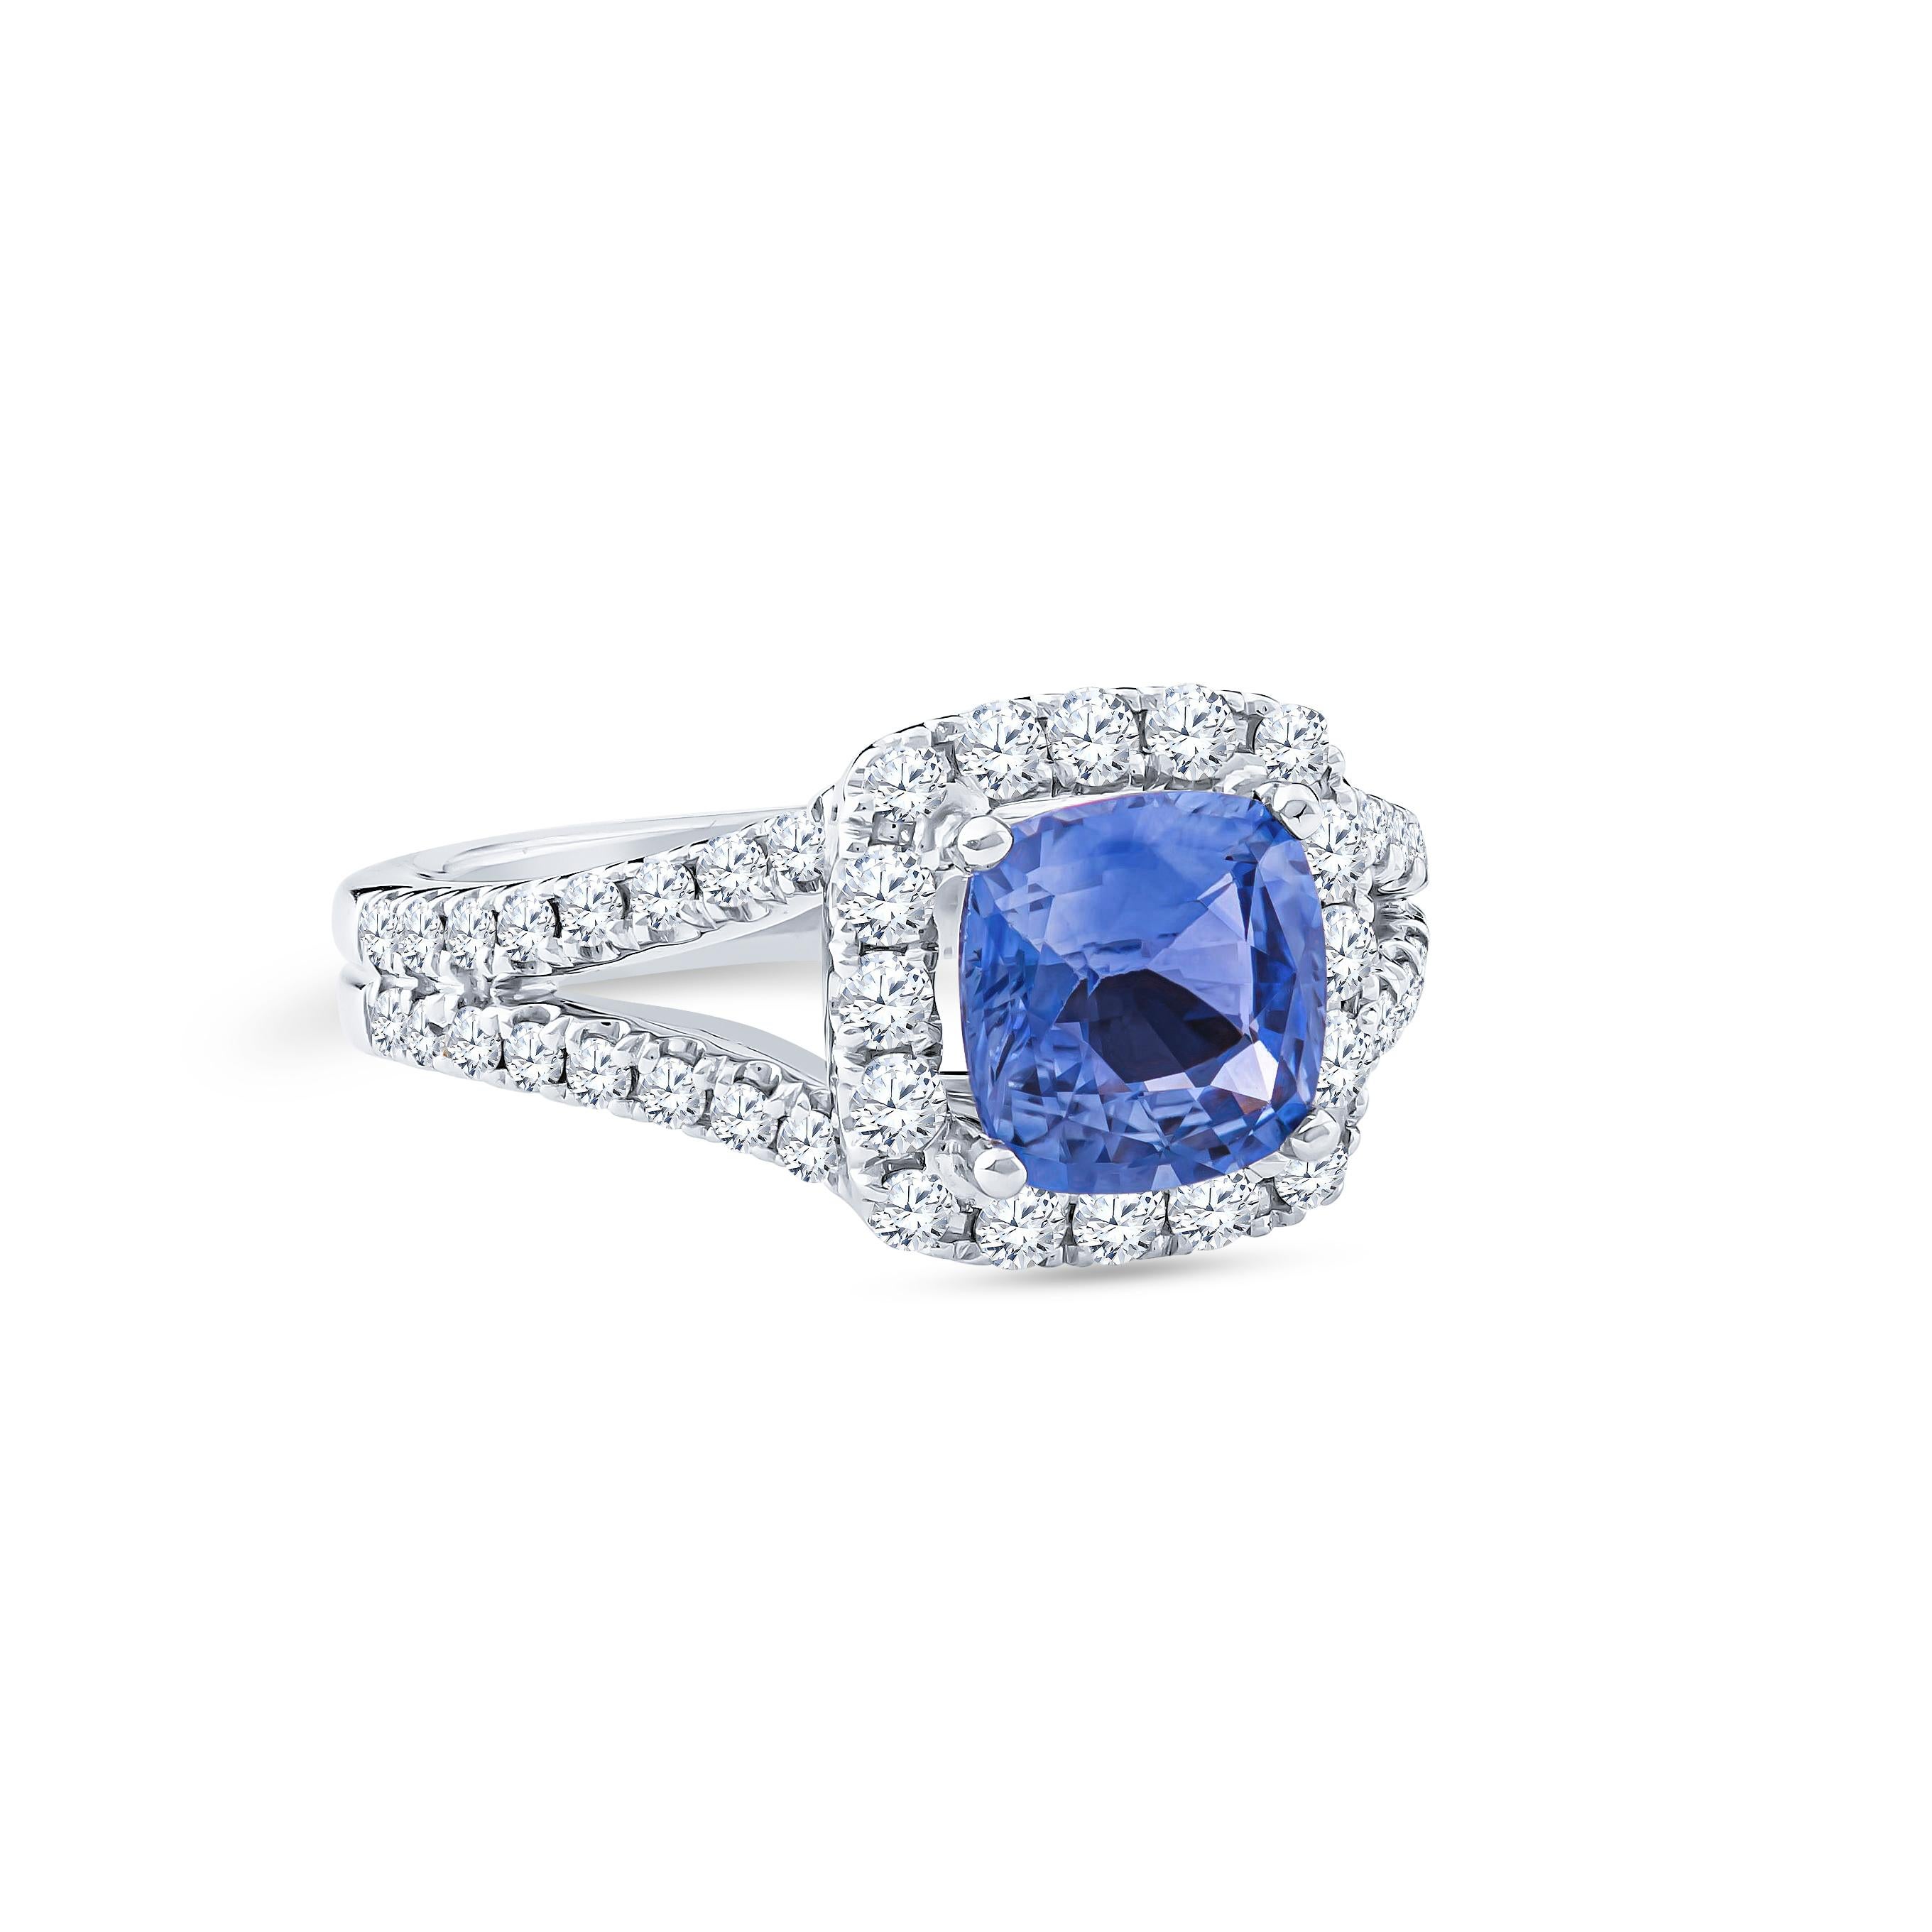 2.11 Carat cushion cut natural heated blue sapphire from Sri Lanka with 0.58 carat total weight round brilliant cut diamonds set in halo split shank form. Designed in 18K white gold sized to 6.5 and may be resized upon request.  

Diamond Quality